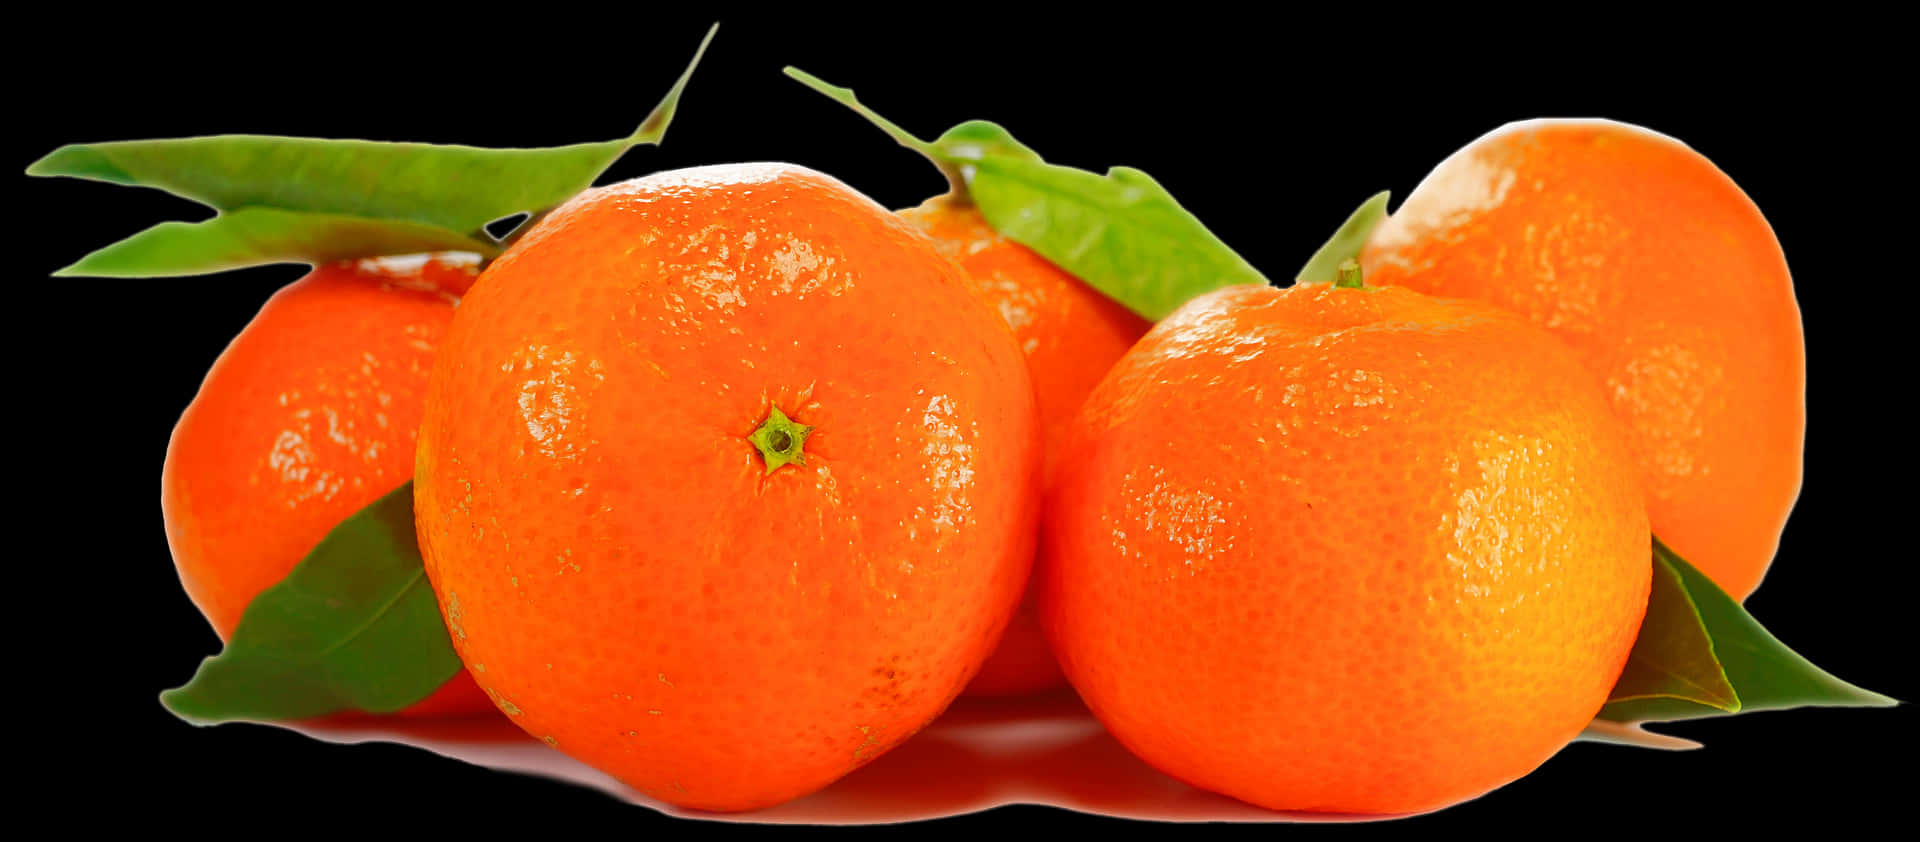 Fresh Orangeswith Leaveson Black Background PNG